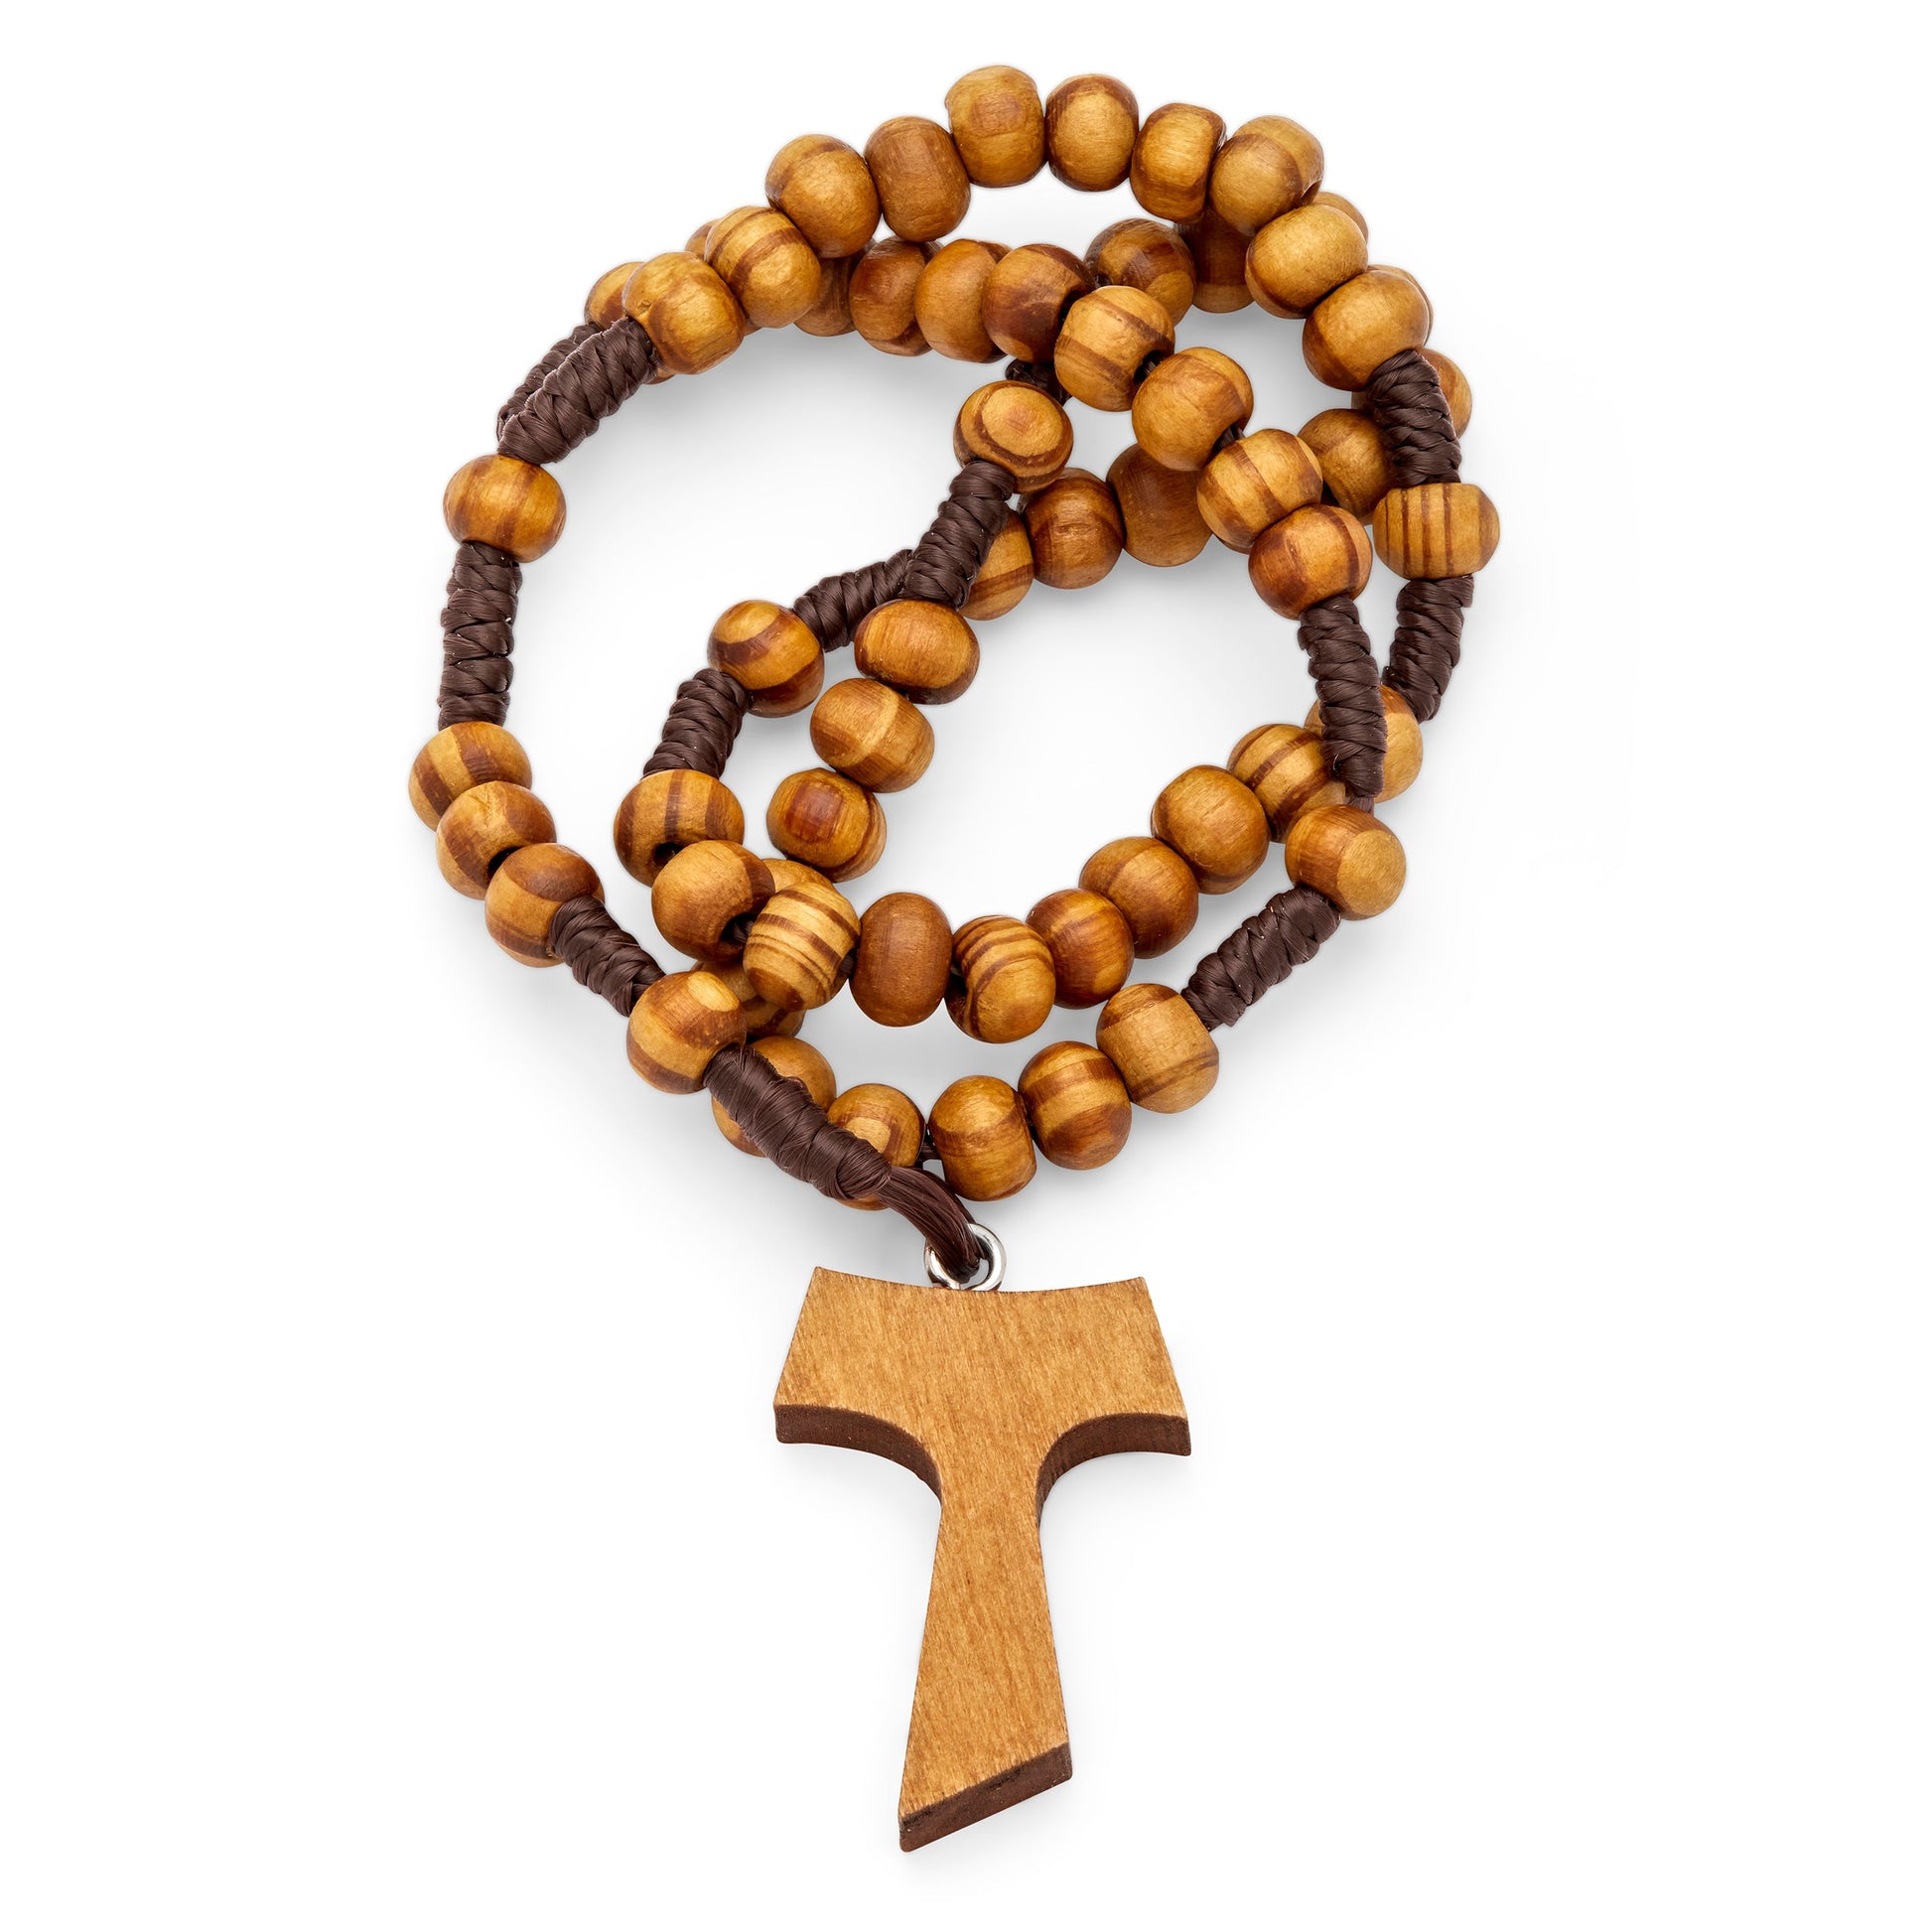 MONDO CATTOLICO Prayer Beads 36 cm (14.17 in) / 8 mm (0.31 in) Wooden Tao Rosary and Case